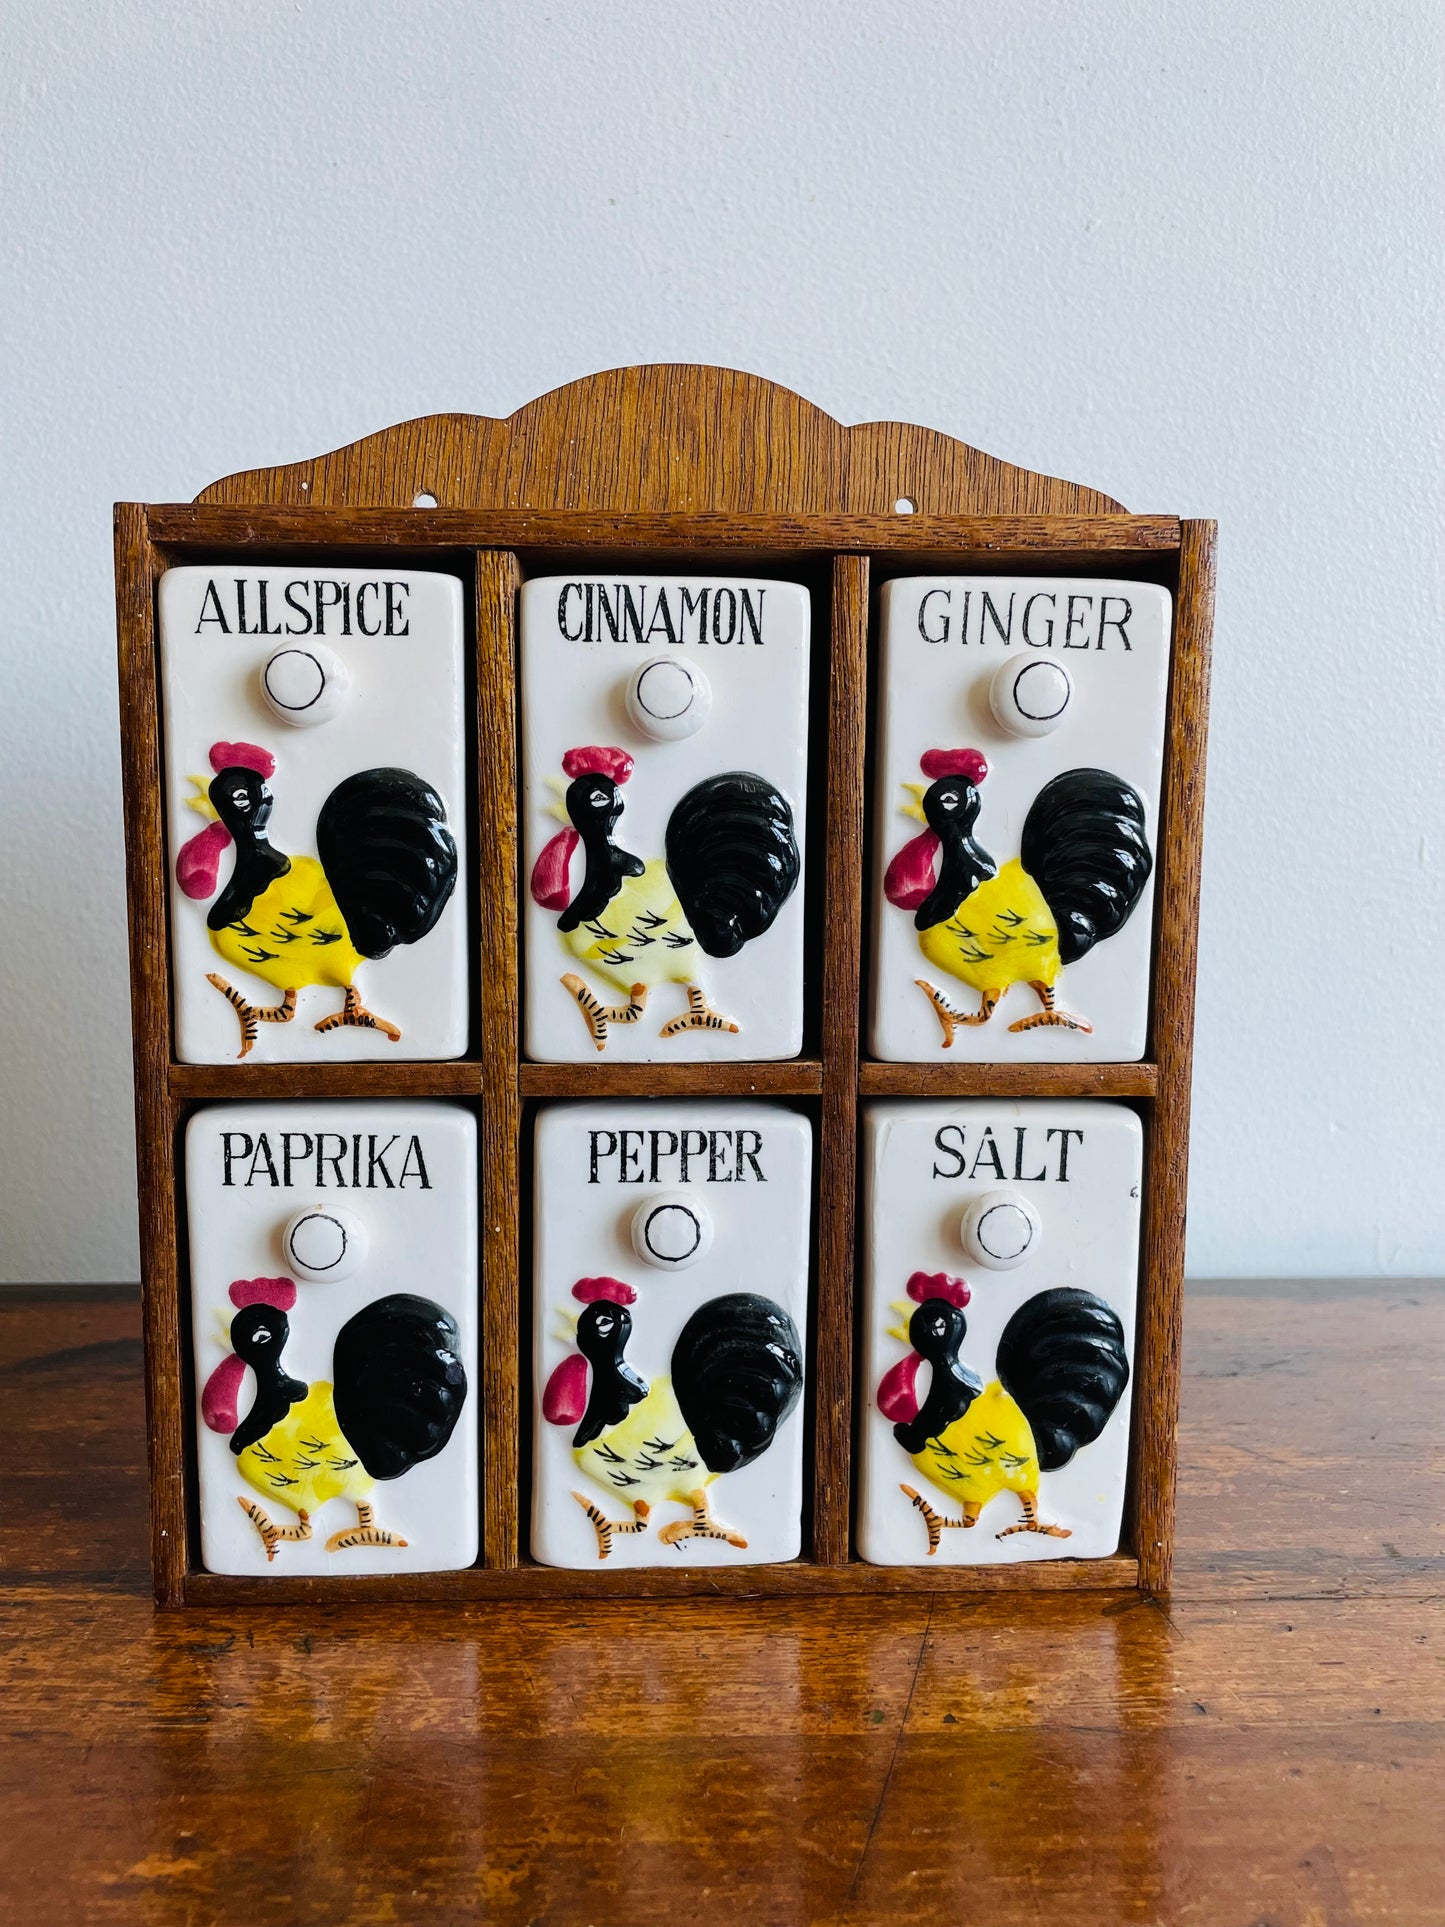 1950s Wall Mounted Spice Rack with Rooster Ceramic Jars - Made in Japan